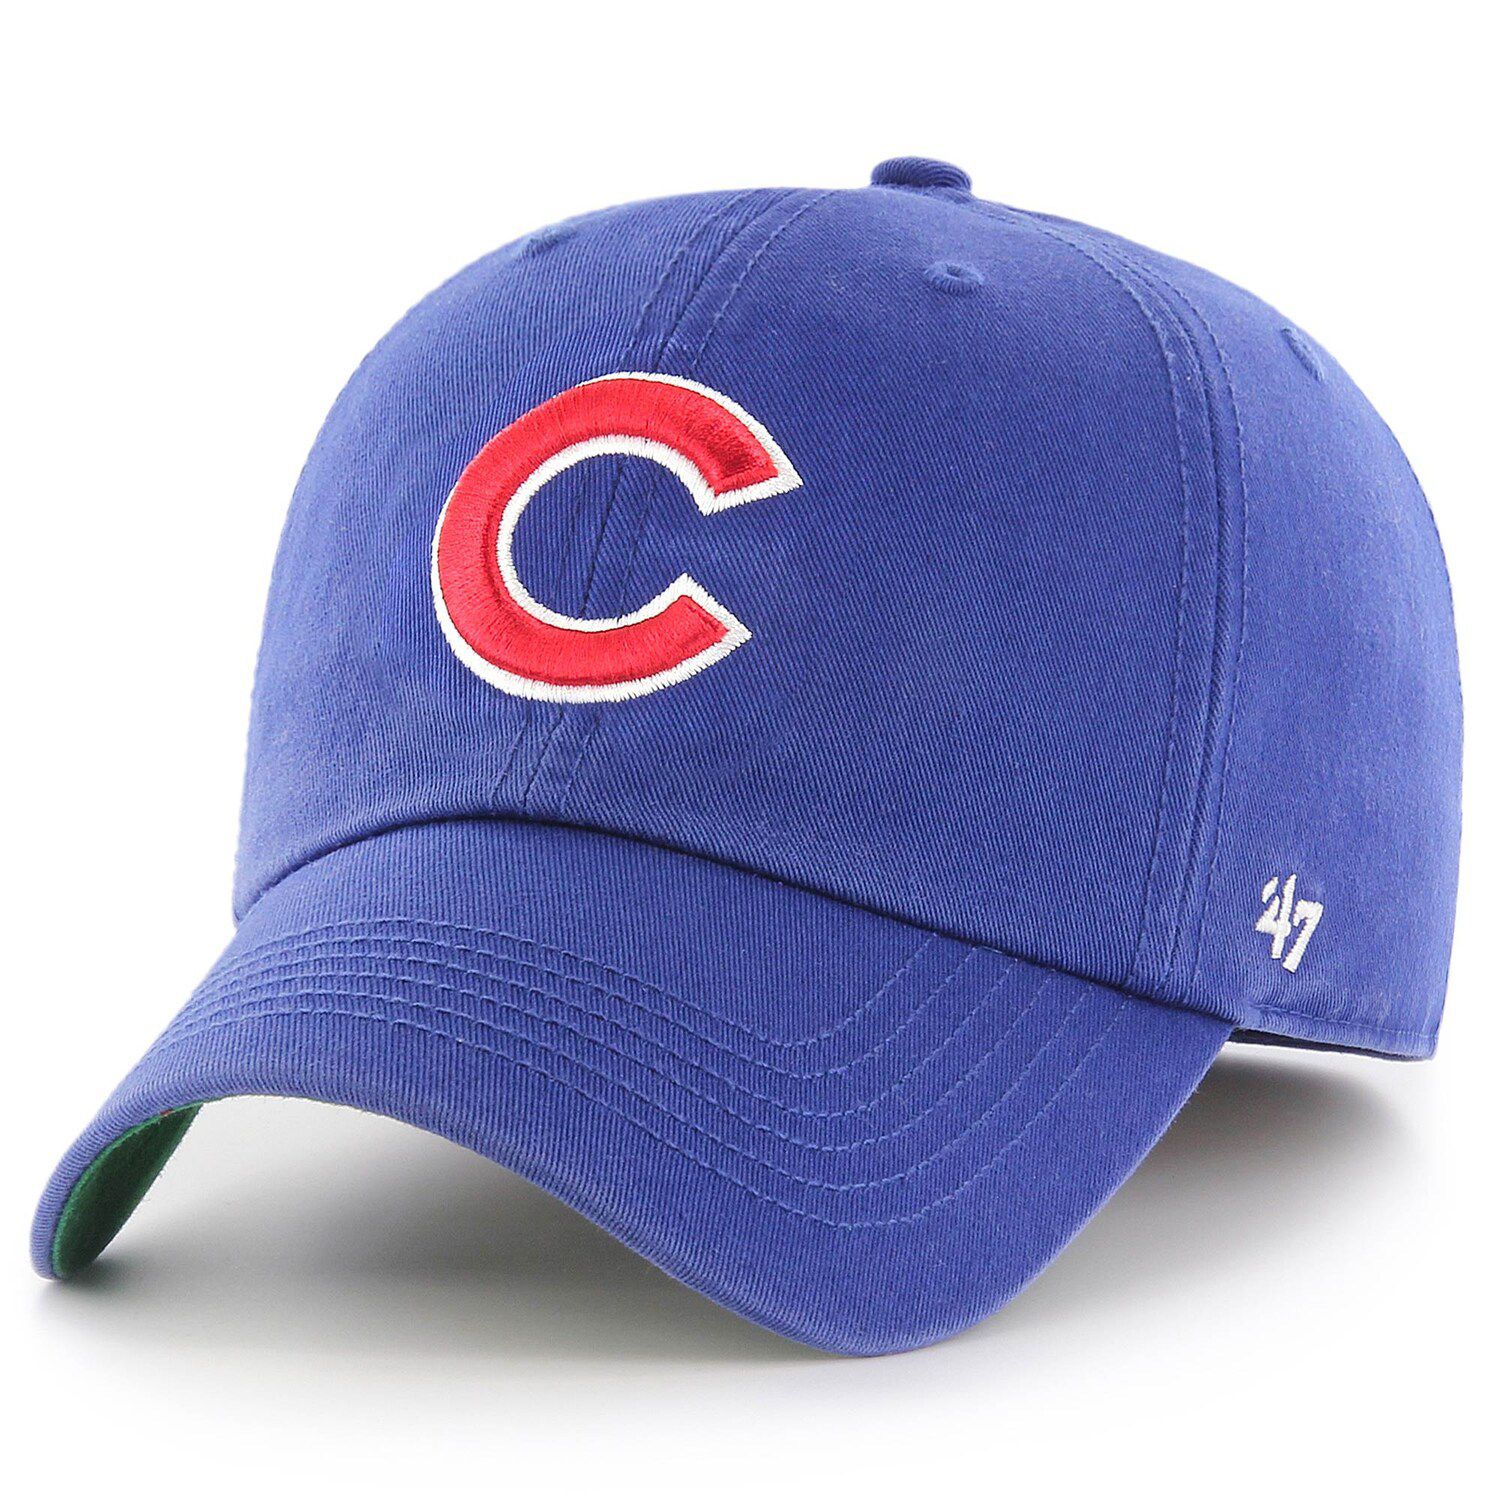 Chicago Cubs Royal Heritage 86 Adjustable Hat by Nike